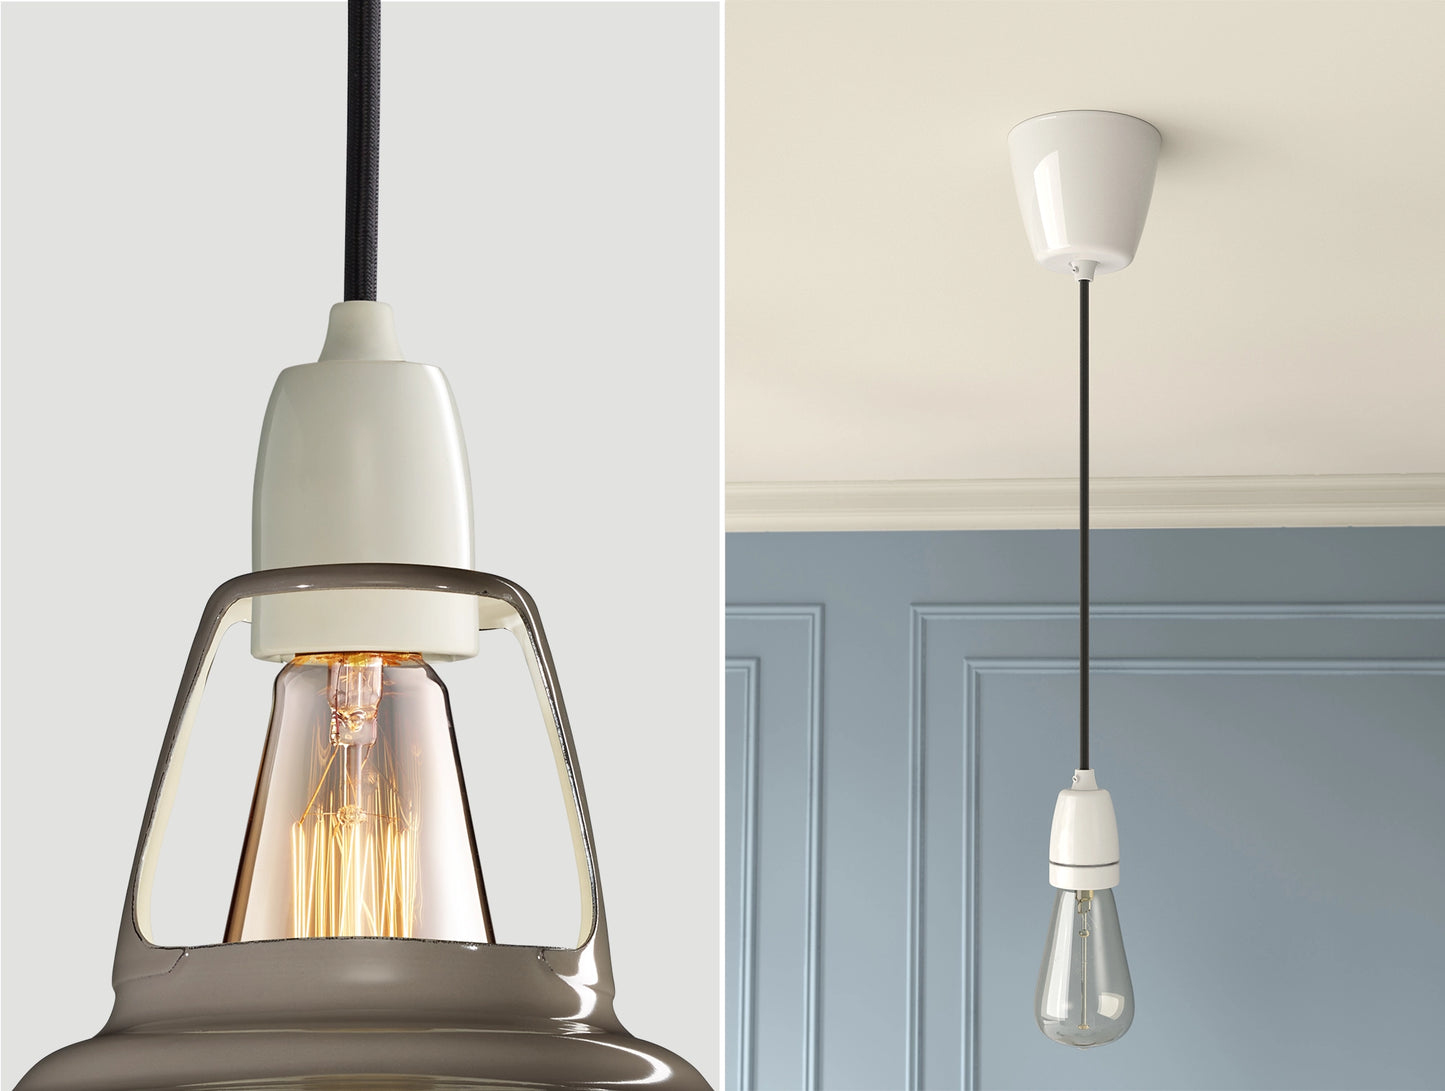 Close up of an E27 Porcelain suspension set on an Original Grey lampshade on the left. On the right, an E27 Porcelain pendant set with a lightbulb is hanging from the ceiling